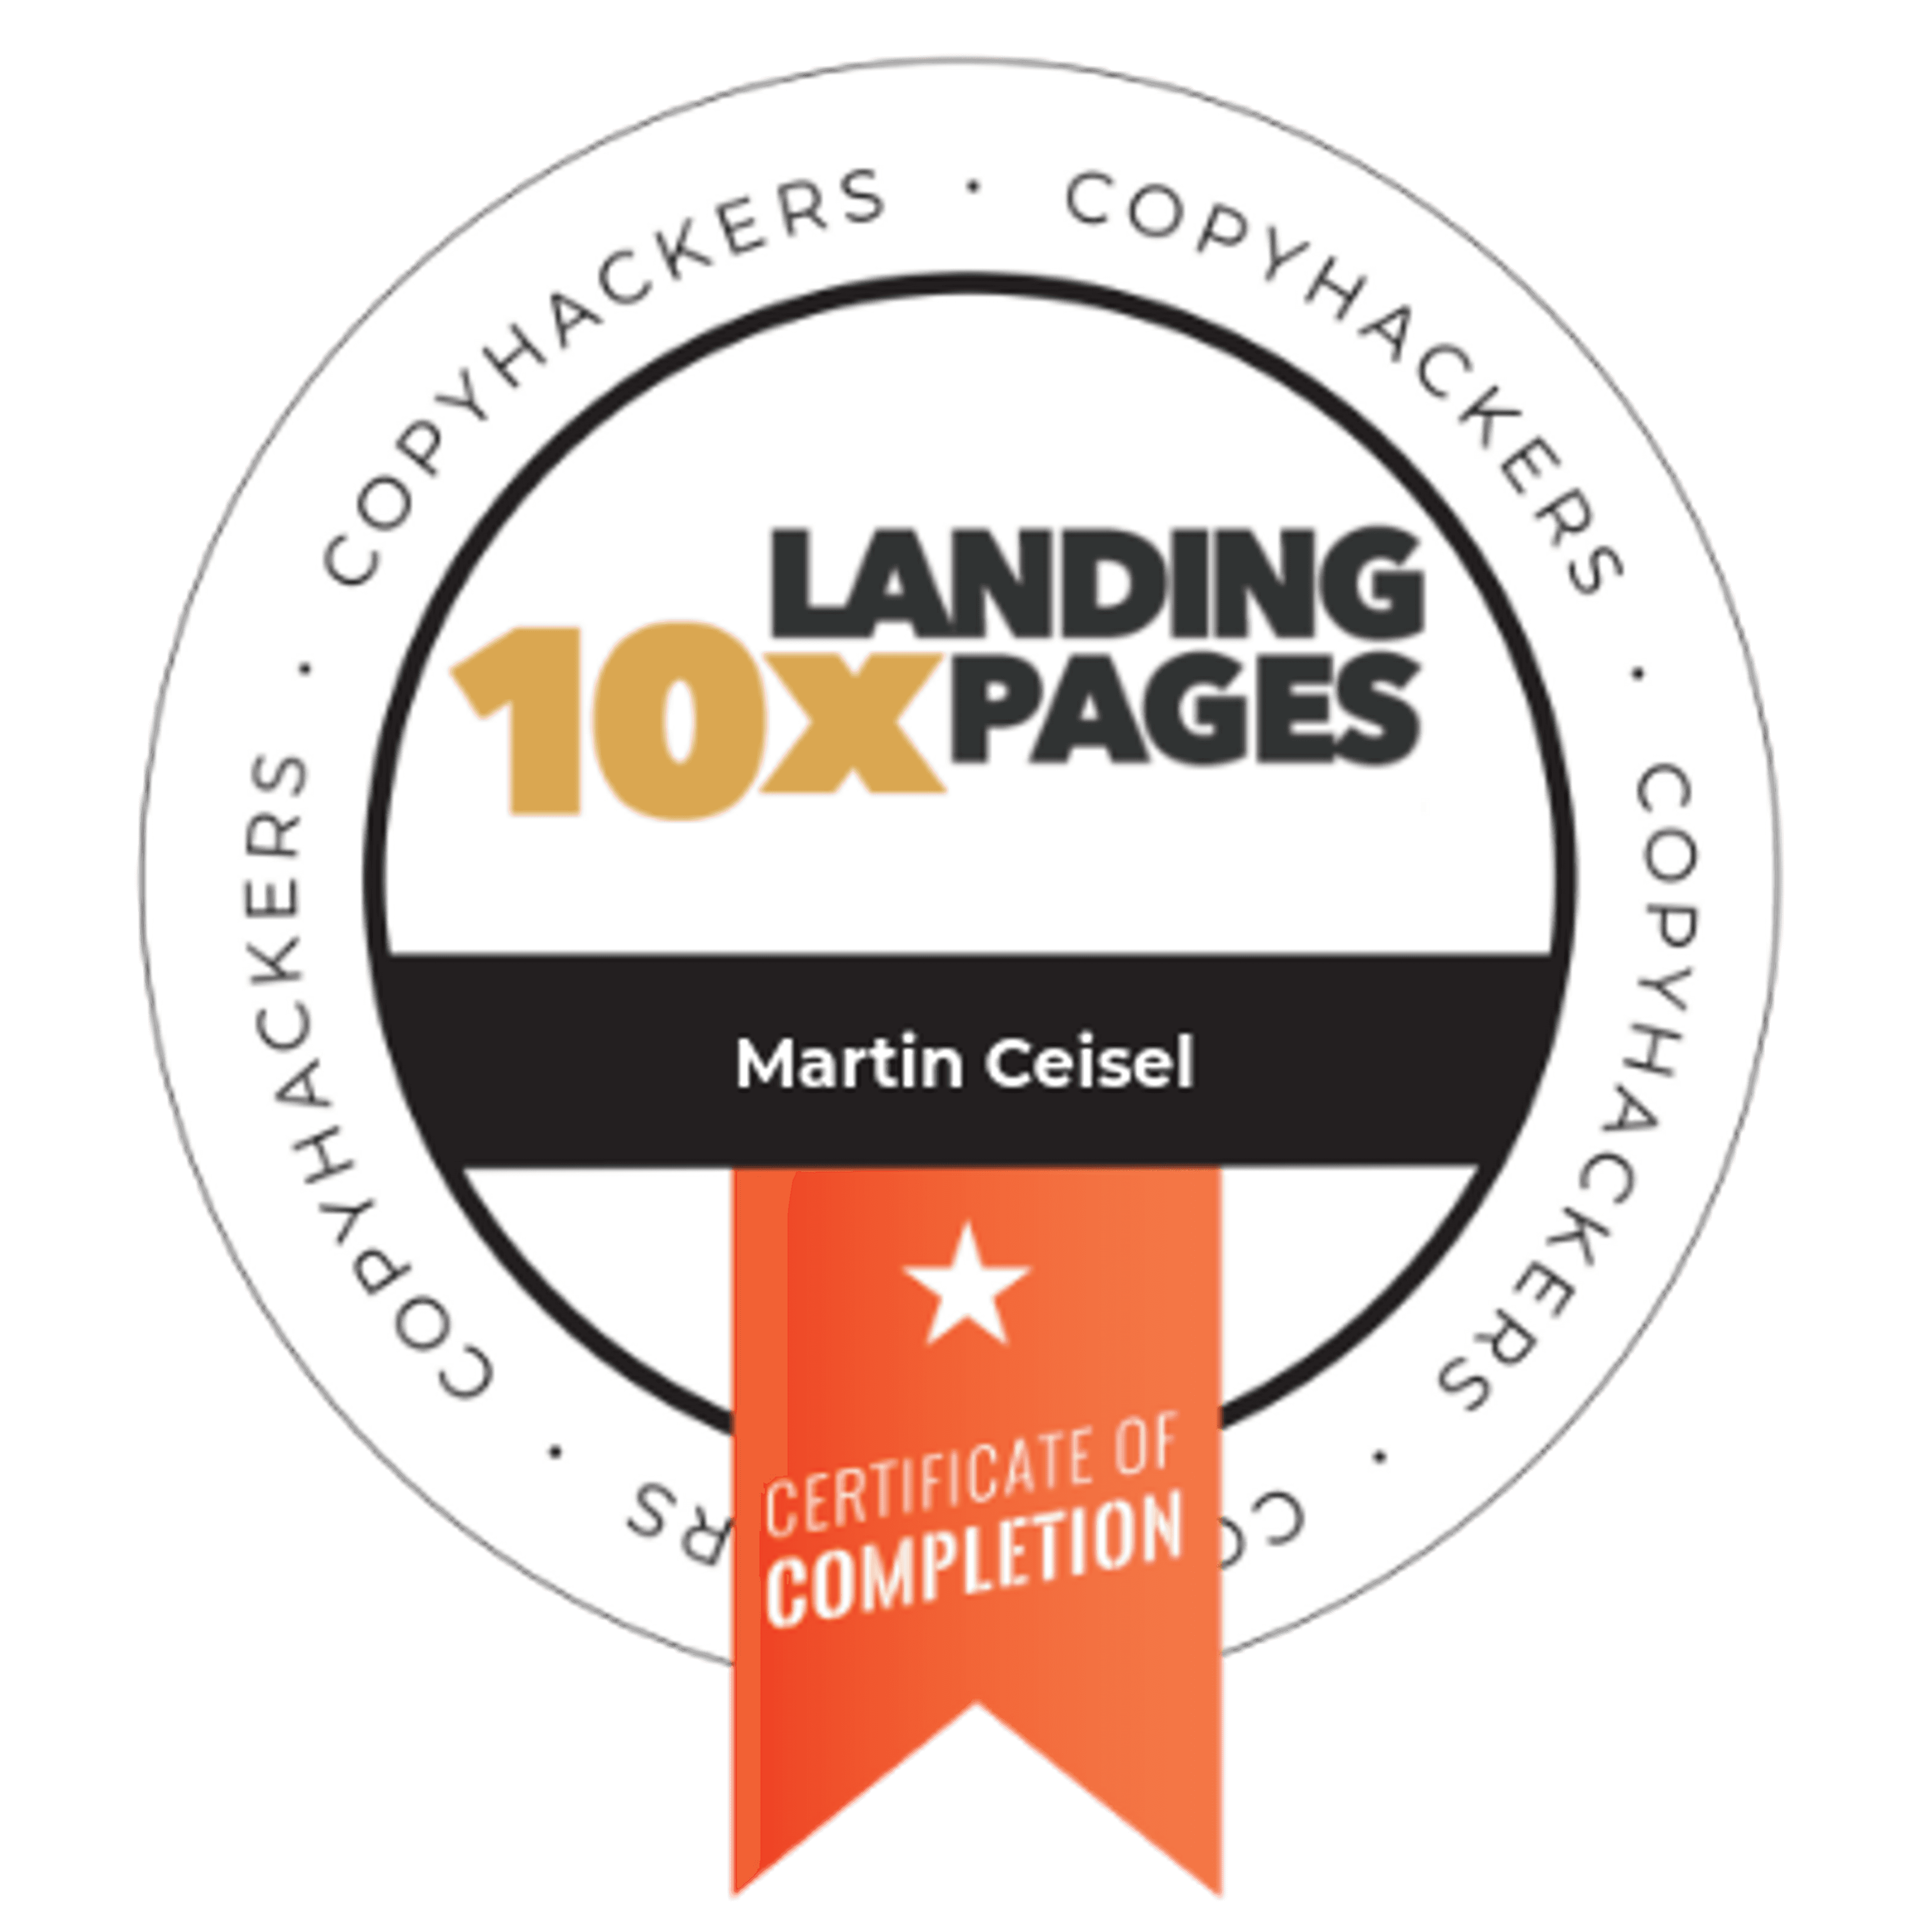 Copyhackers 10x Landing Pages badge for successfully completing conversion-focused copywriting training.